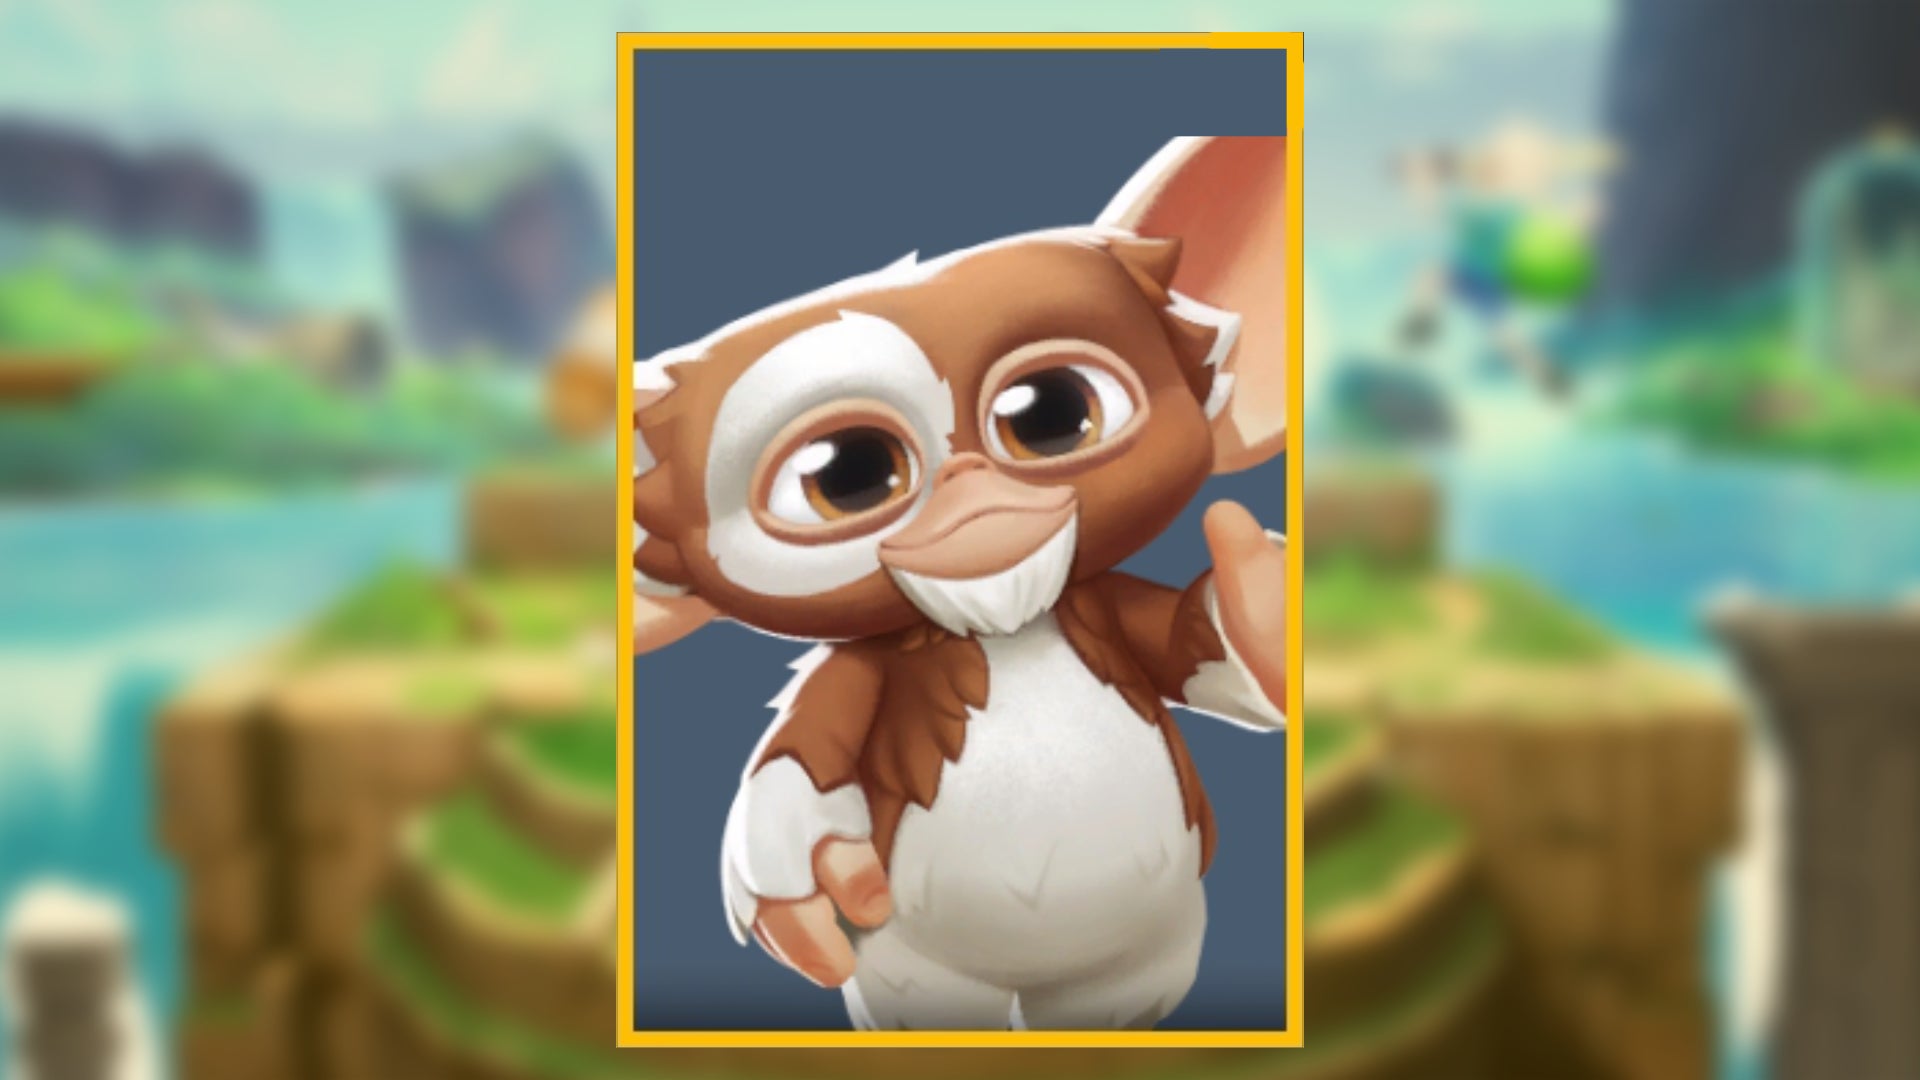 The character portrait of Gizmo, a playable character in MultiVersus, against a blurred background.